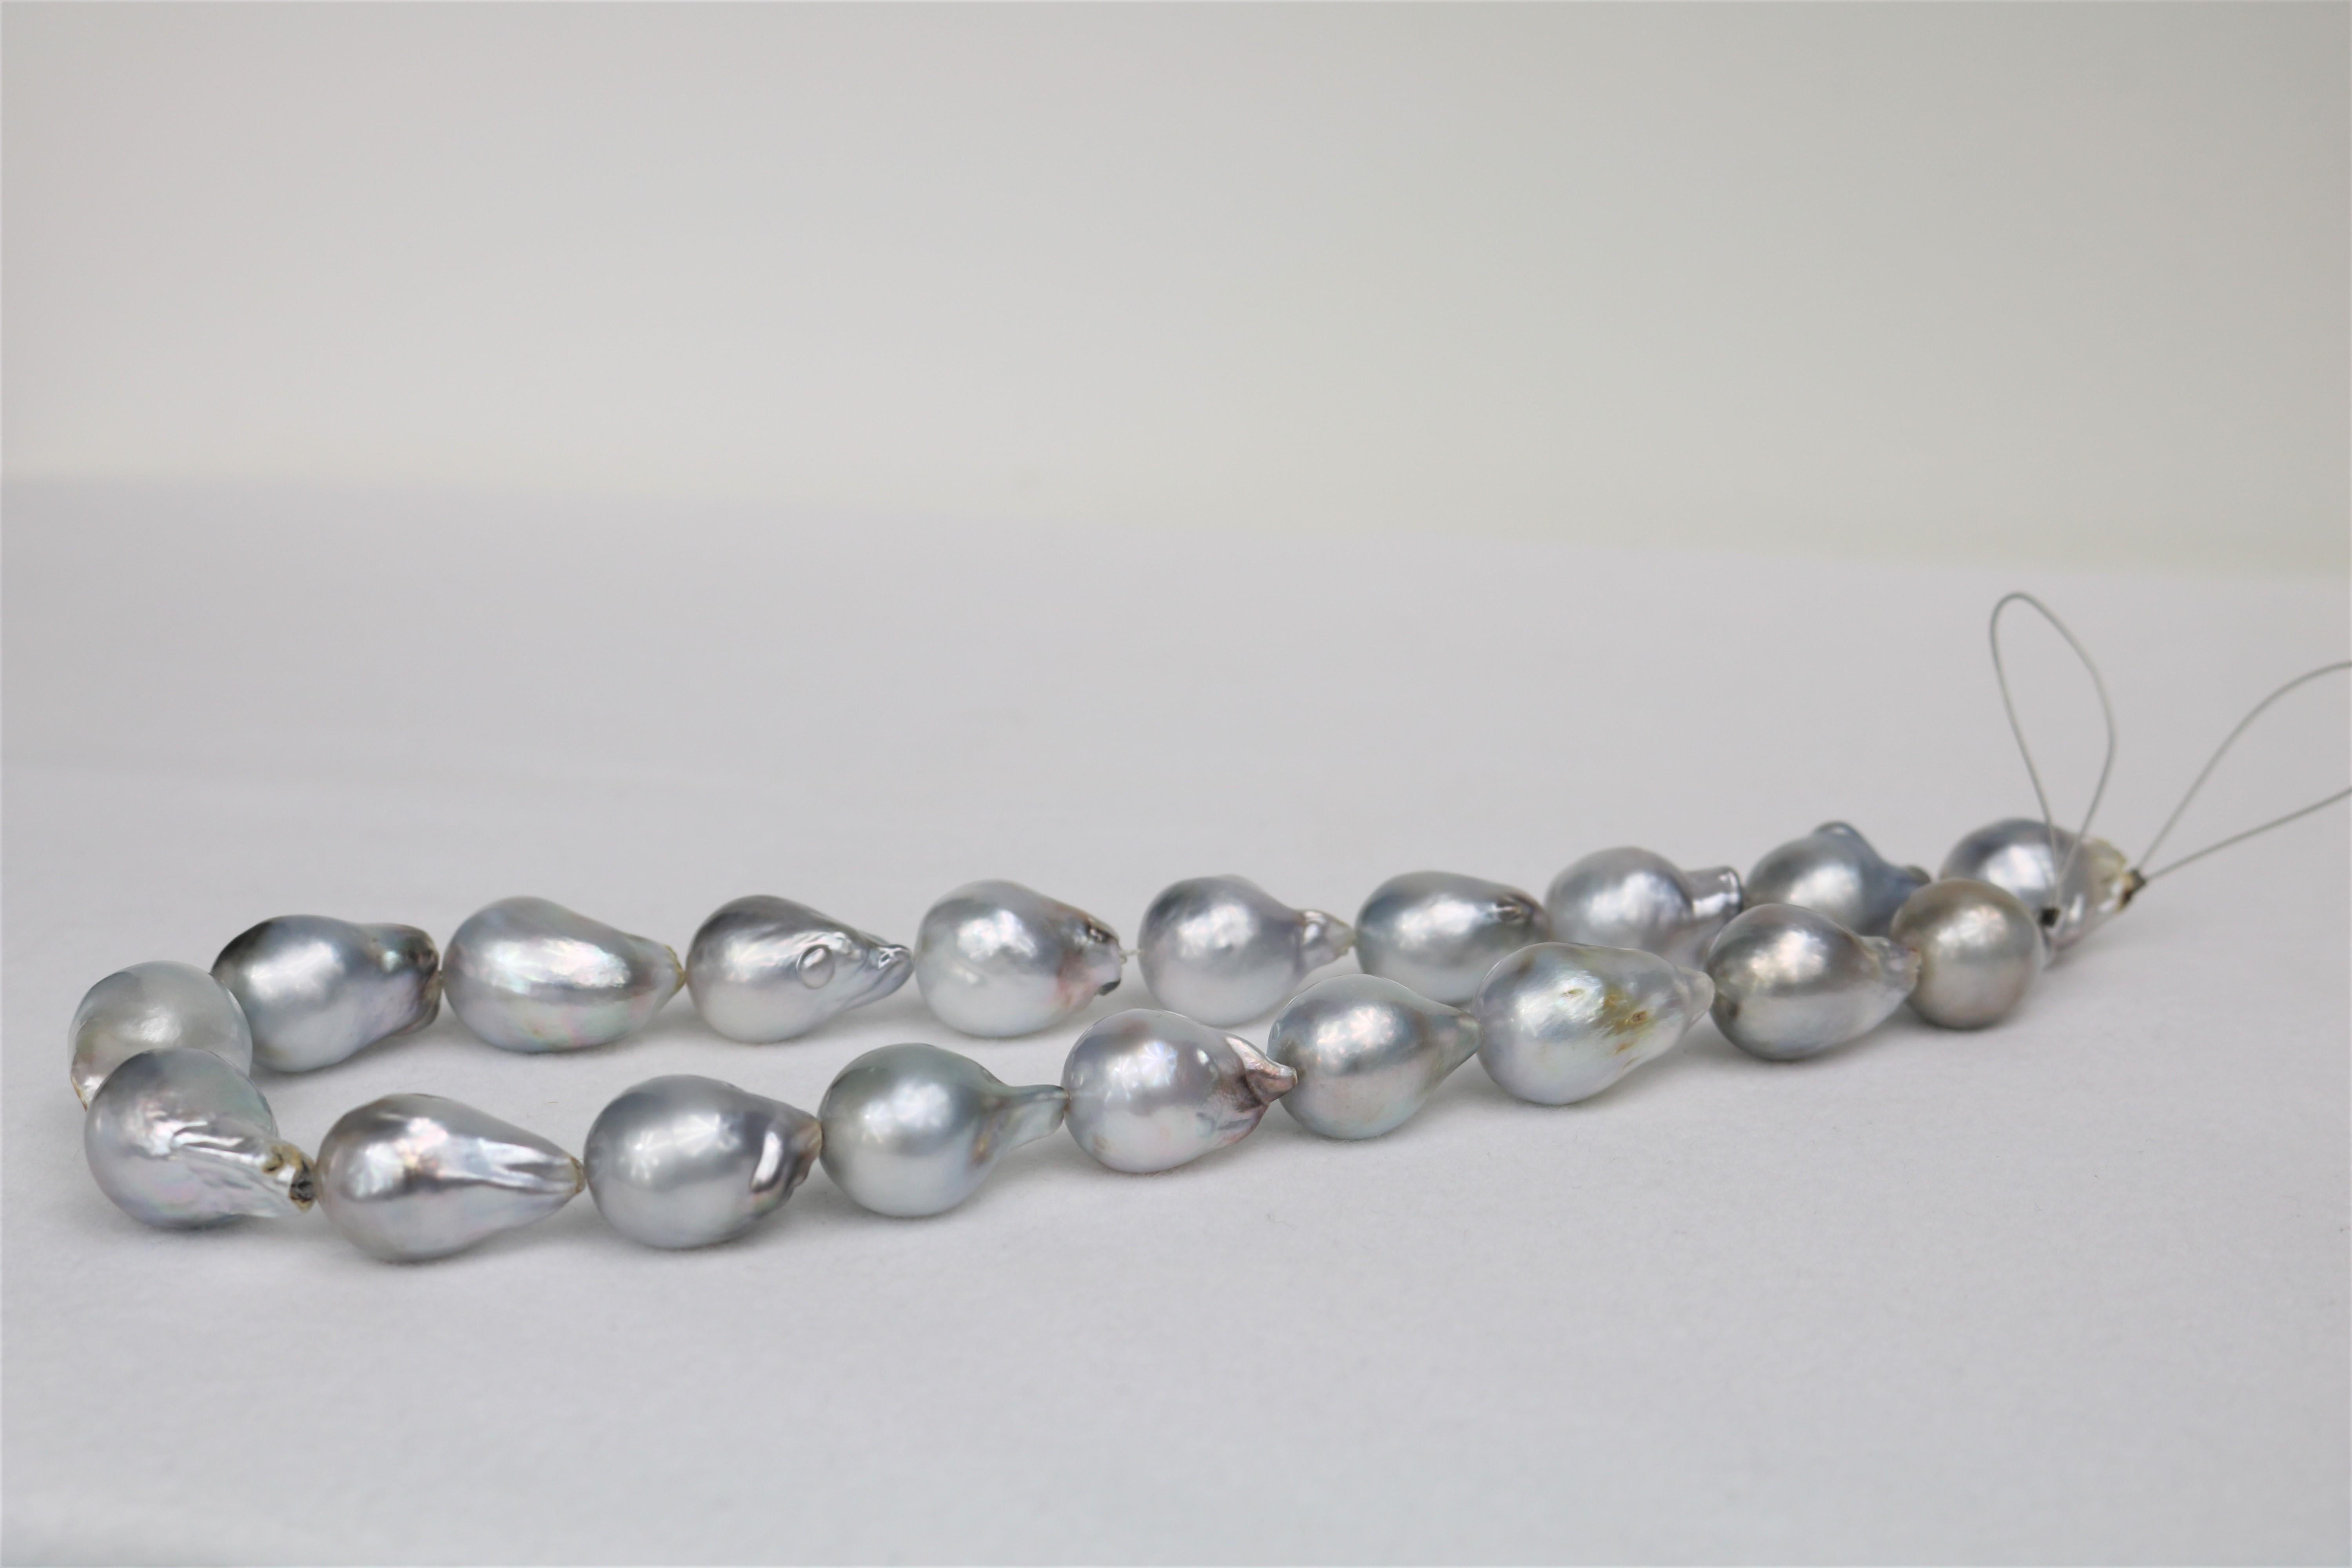 16-17mm Tahitian Silver Grey Long Baroque Necklace with Gold Clasp
AAA Quality, Tahitian Silvery Grey RARE large baroque pearls, 18 inches hand knotted with gold fishhook clasp #CP47
